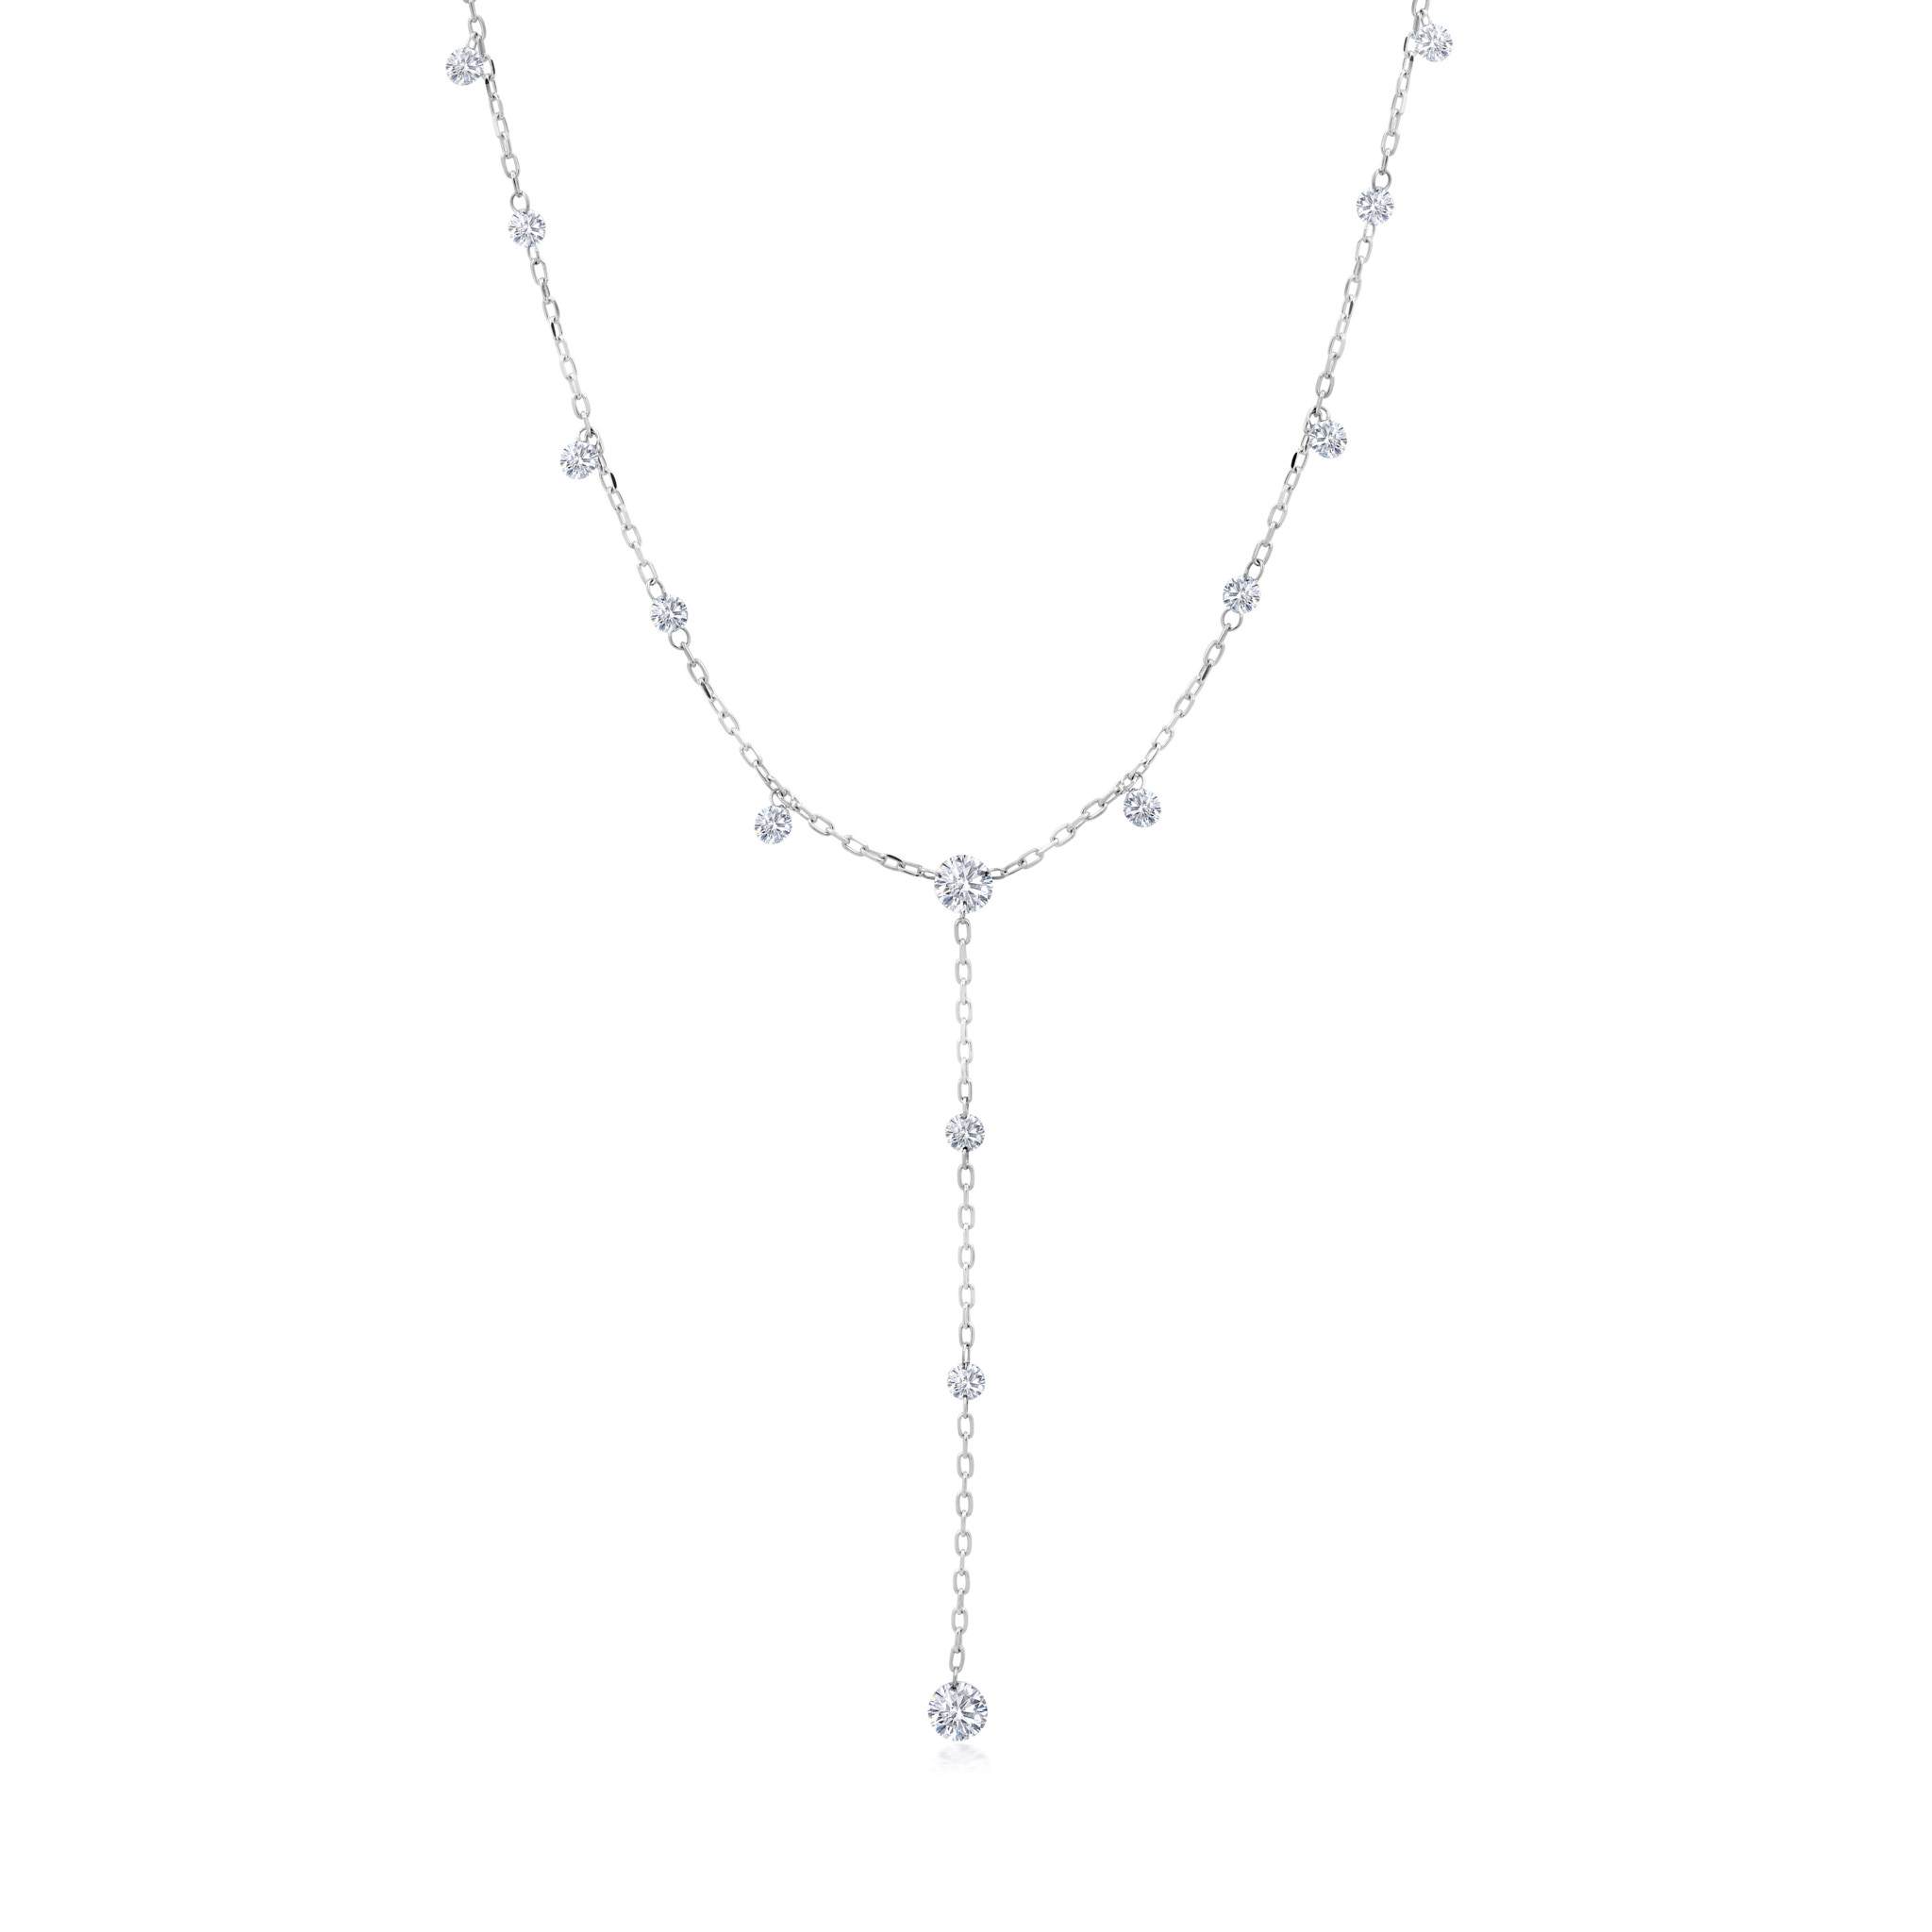 Graziela Gems - Necklace - 1 Ct Floating Diamond Y-Necklace - White Gold